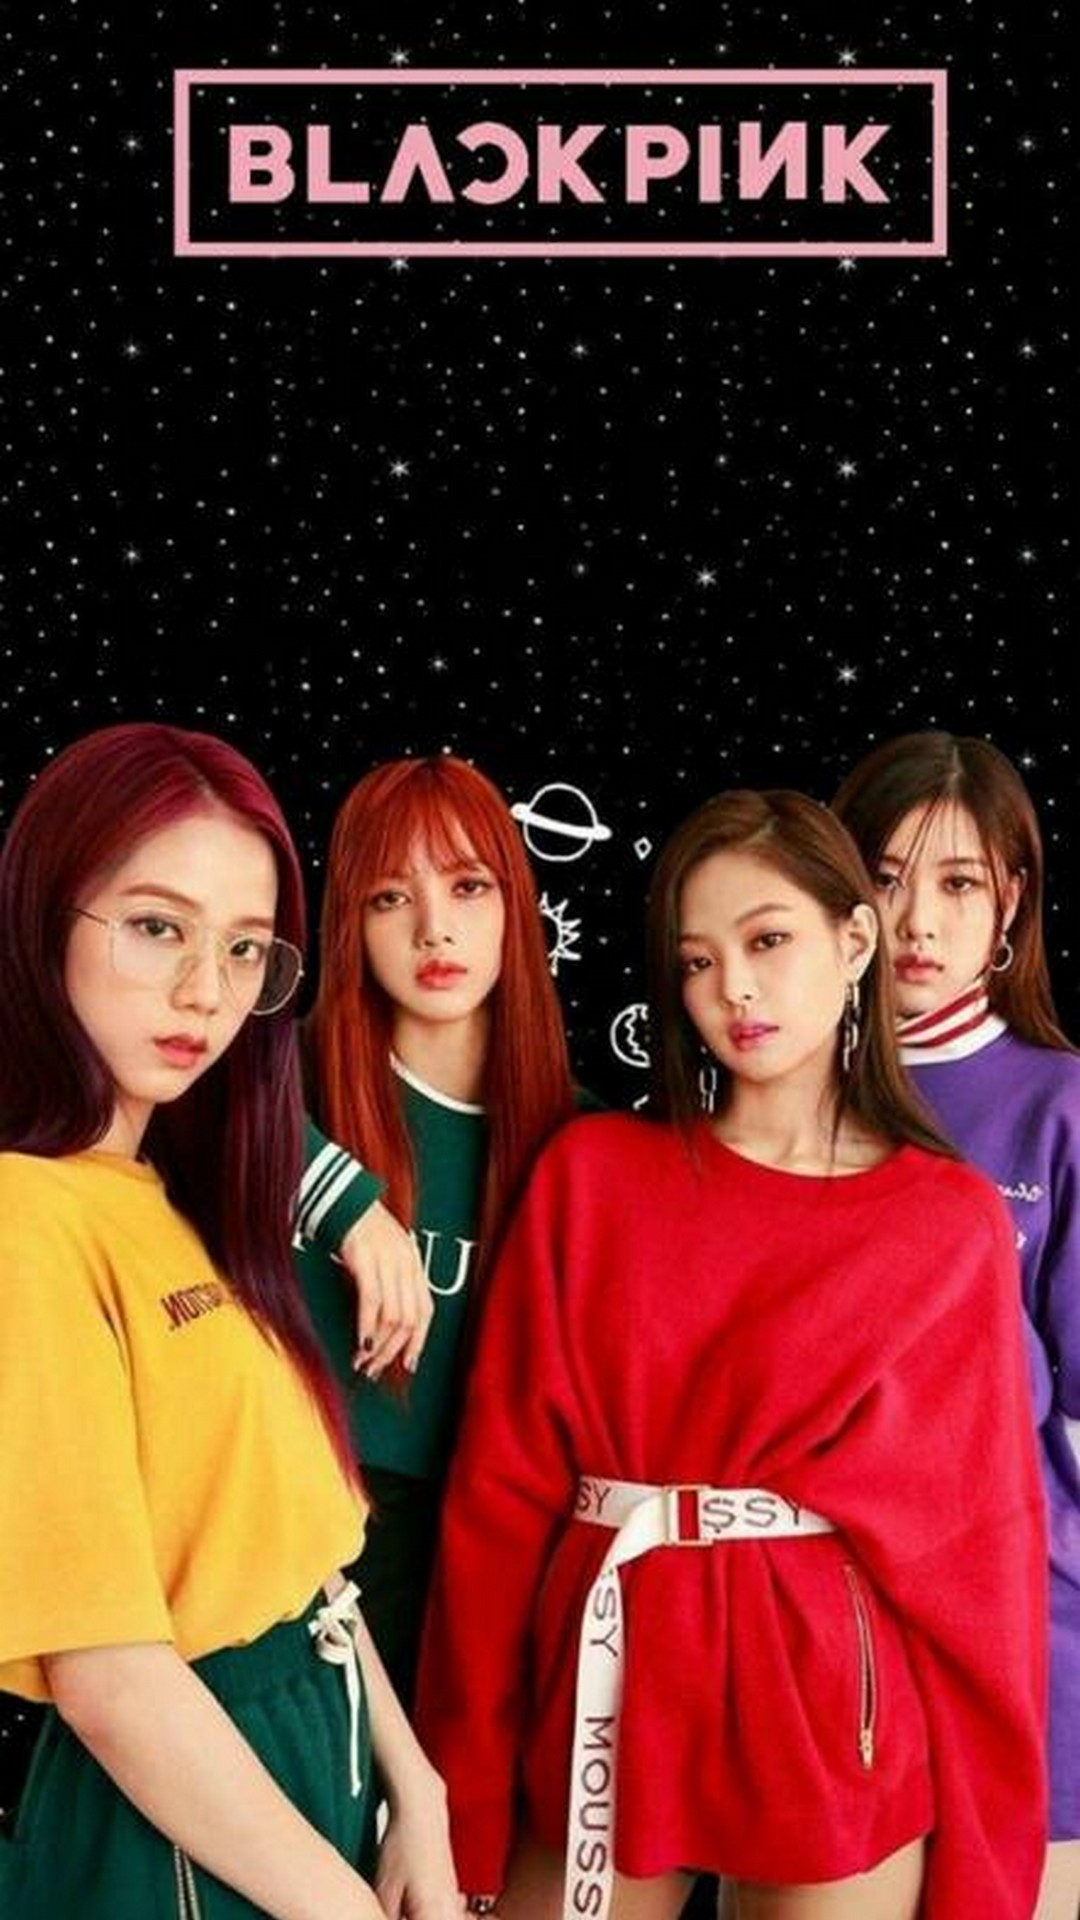 Blackpink Wallpaper Android With high-resolution 1080X1920 pixel. You can use this wallpaper for your Android backgrounds, Tablet, Samsung Screensavers, Mobile Phone Lock Screen and another Smartphones device